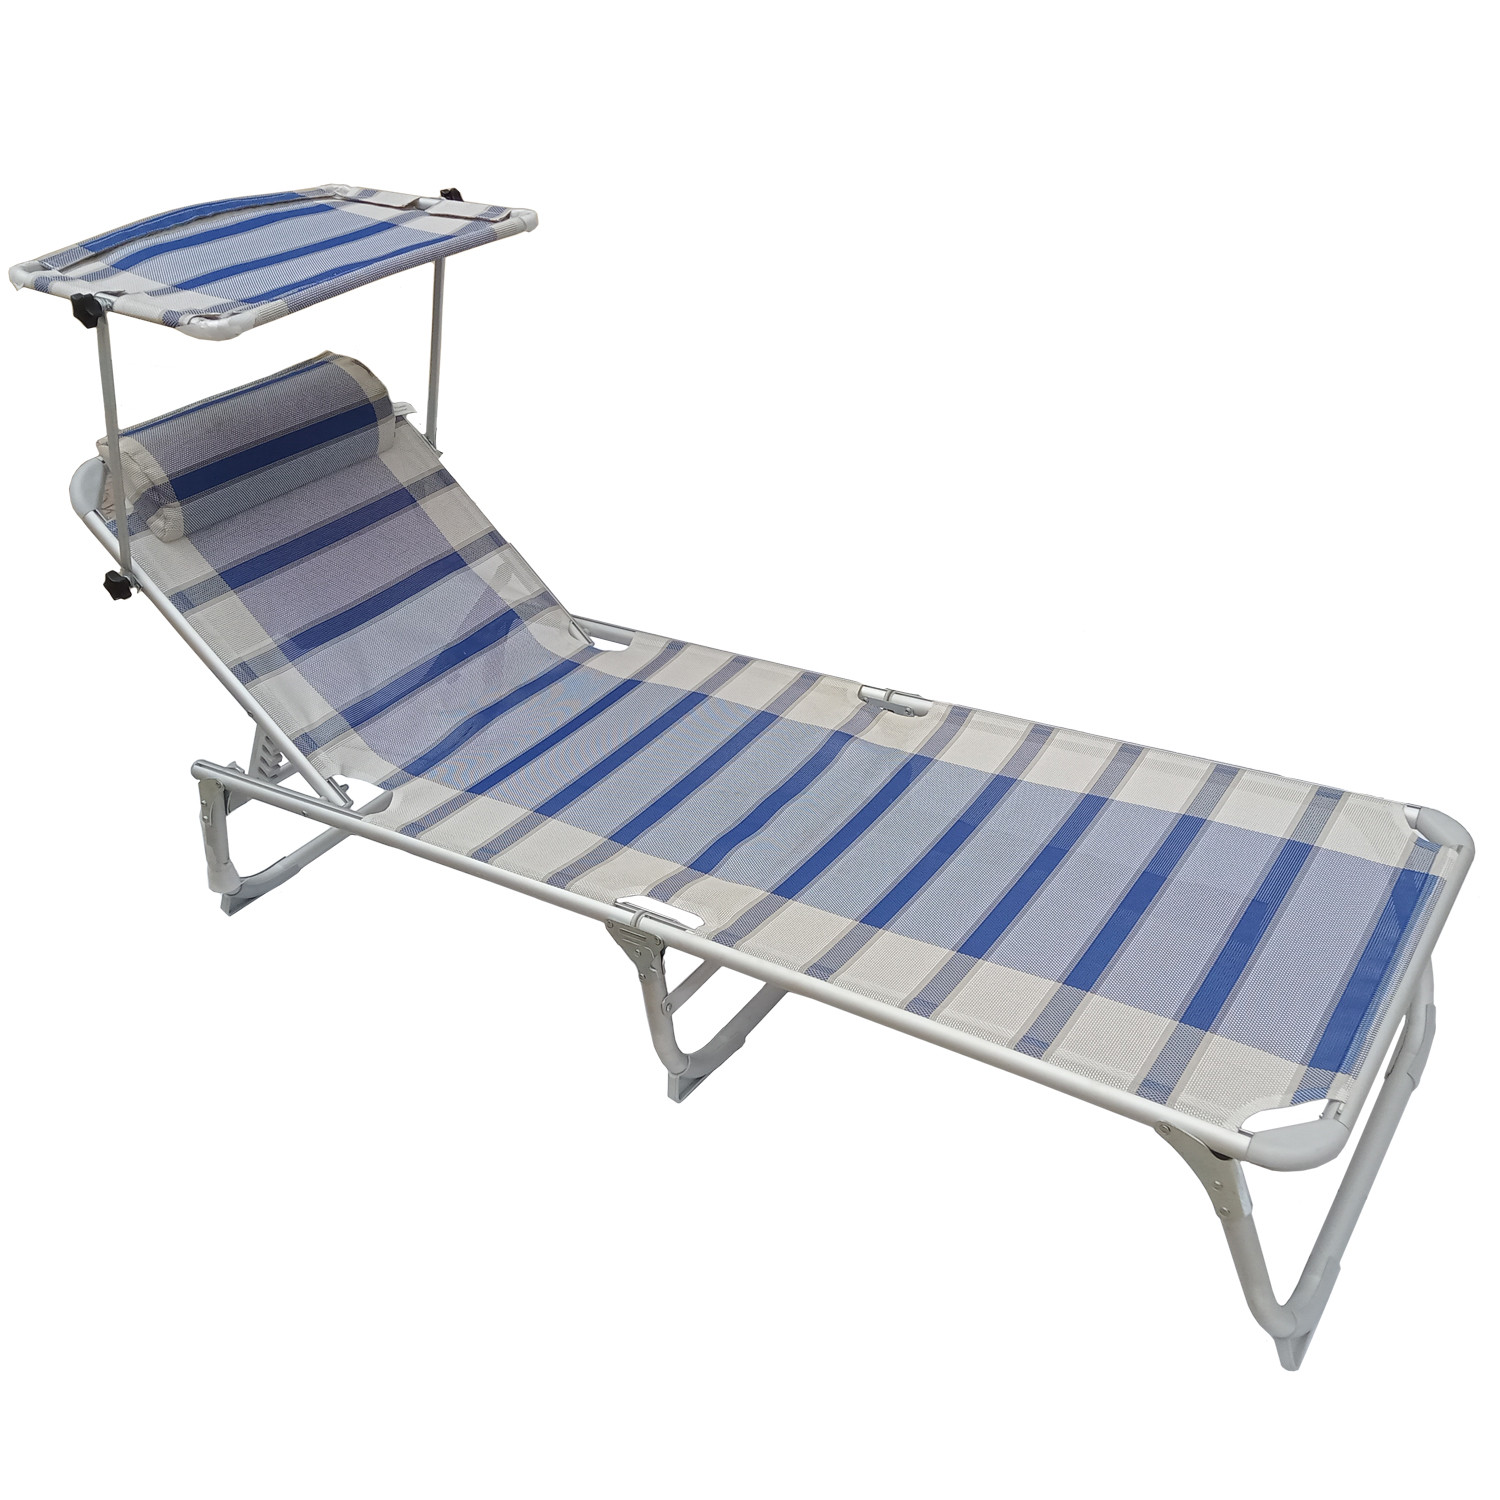 Bel-Sol Aluminium Portable 5 Way Adjustable Camping bed, Beach Chair, Lounge Chair, Relaxer Bed, with Sun Shade and Pillow